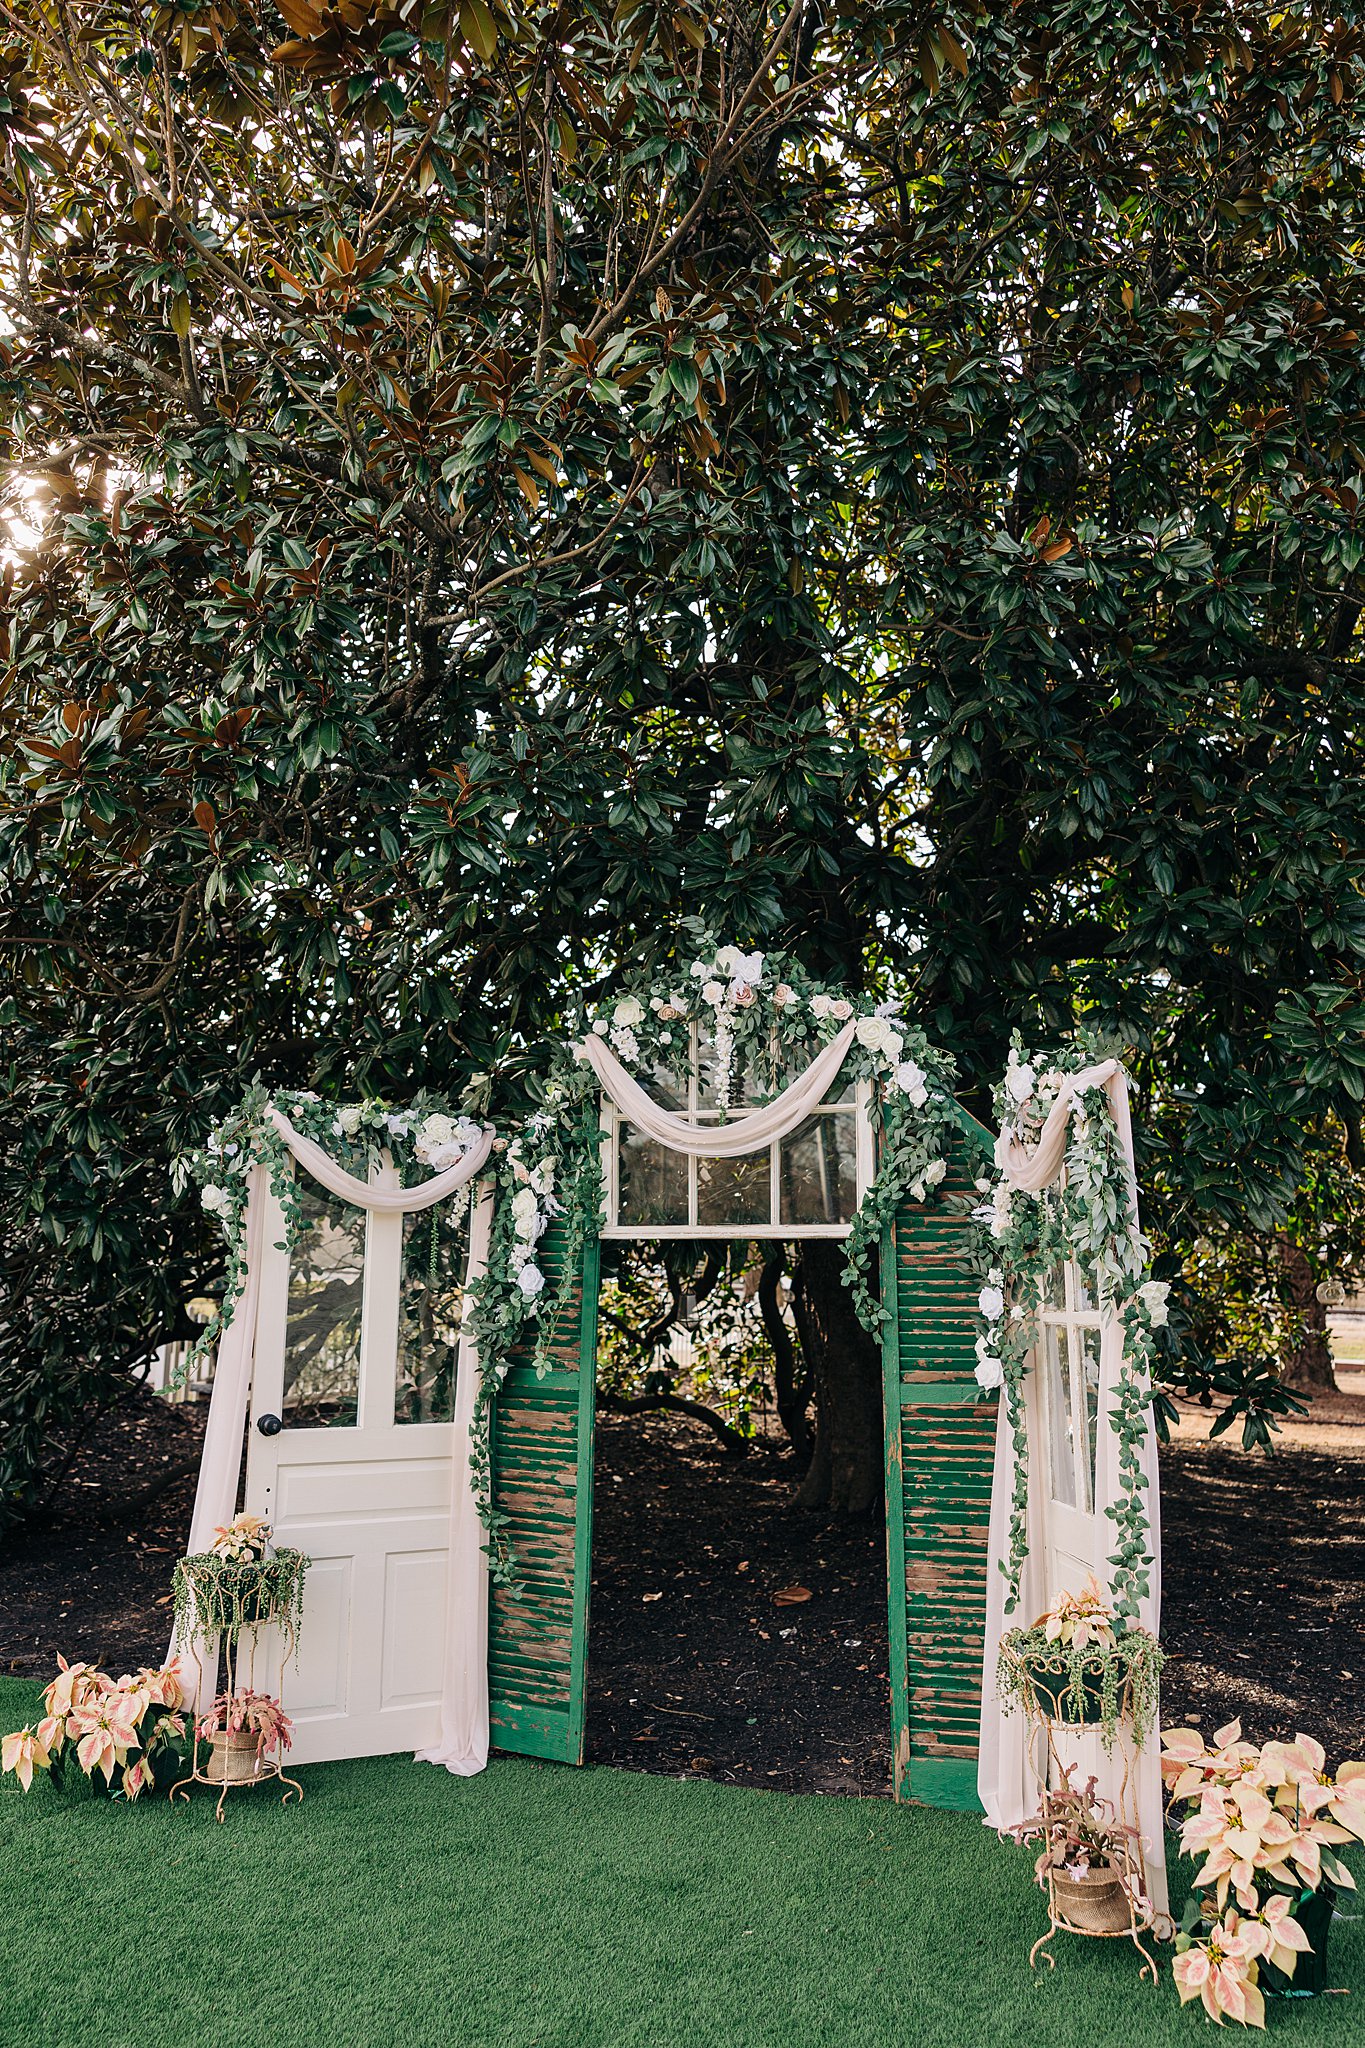 Details of a The Victorian: Youngsville wedding ceremony arbor with antique doors and flowers